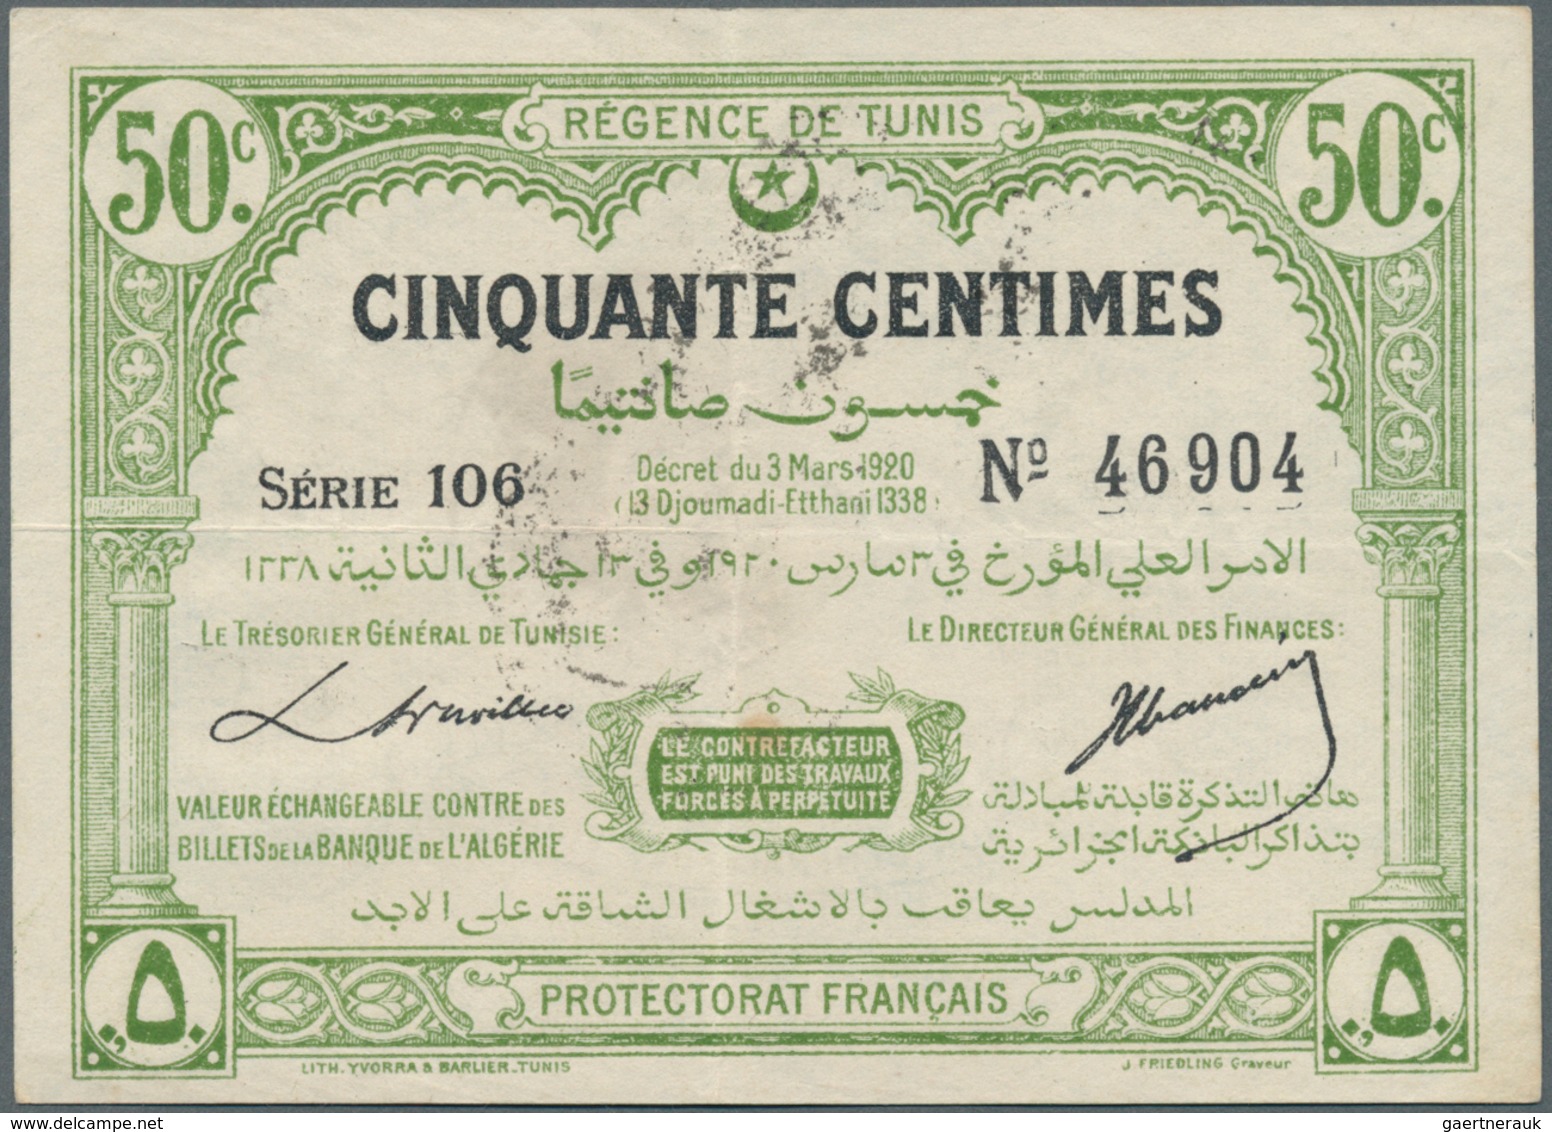 02503 Tunisia / Tunisien: 50 Centimes 1920 P. 48, Horizontal And Vertical Fold, Still Strong Paper And Nic - Tunisia